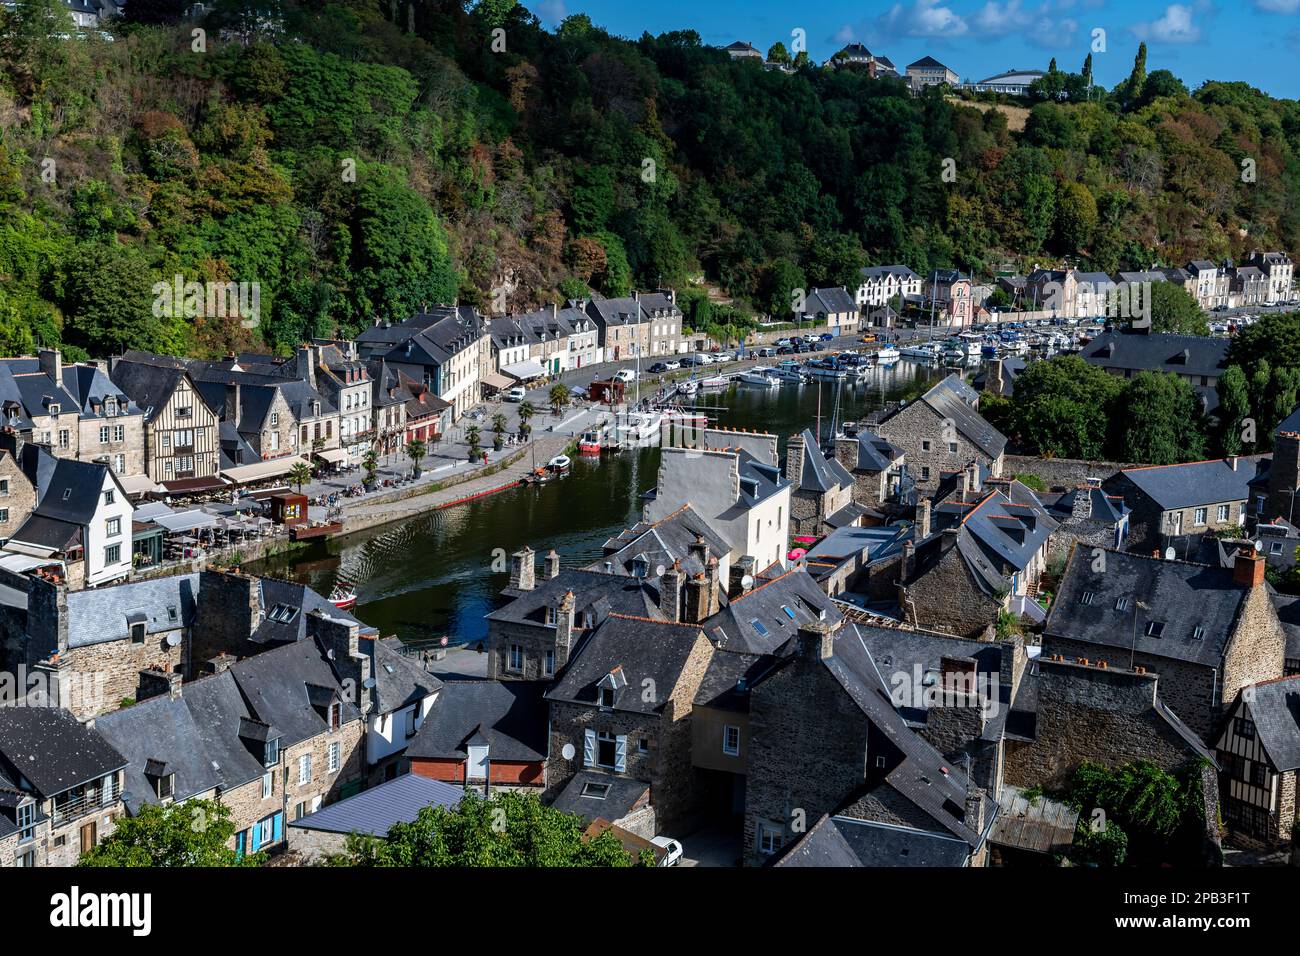 Breton Village Dinan With Half-Timbered Houses And River La Rance In Department Ille et Vilaine In Brittany, France Stock Photo